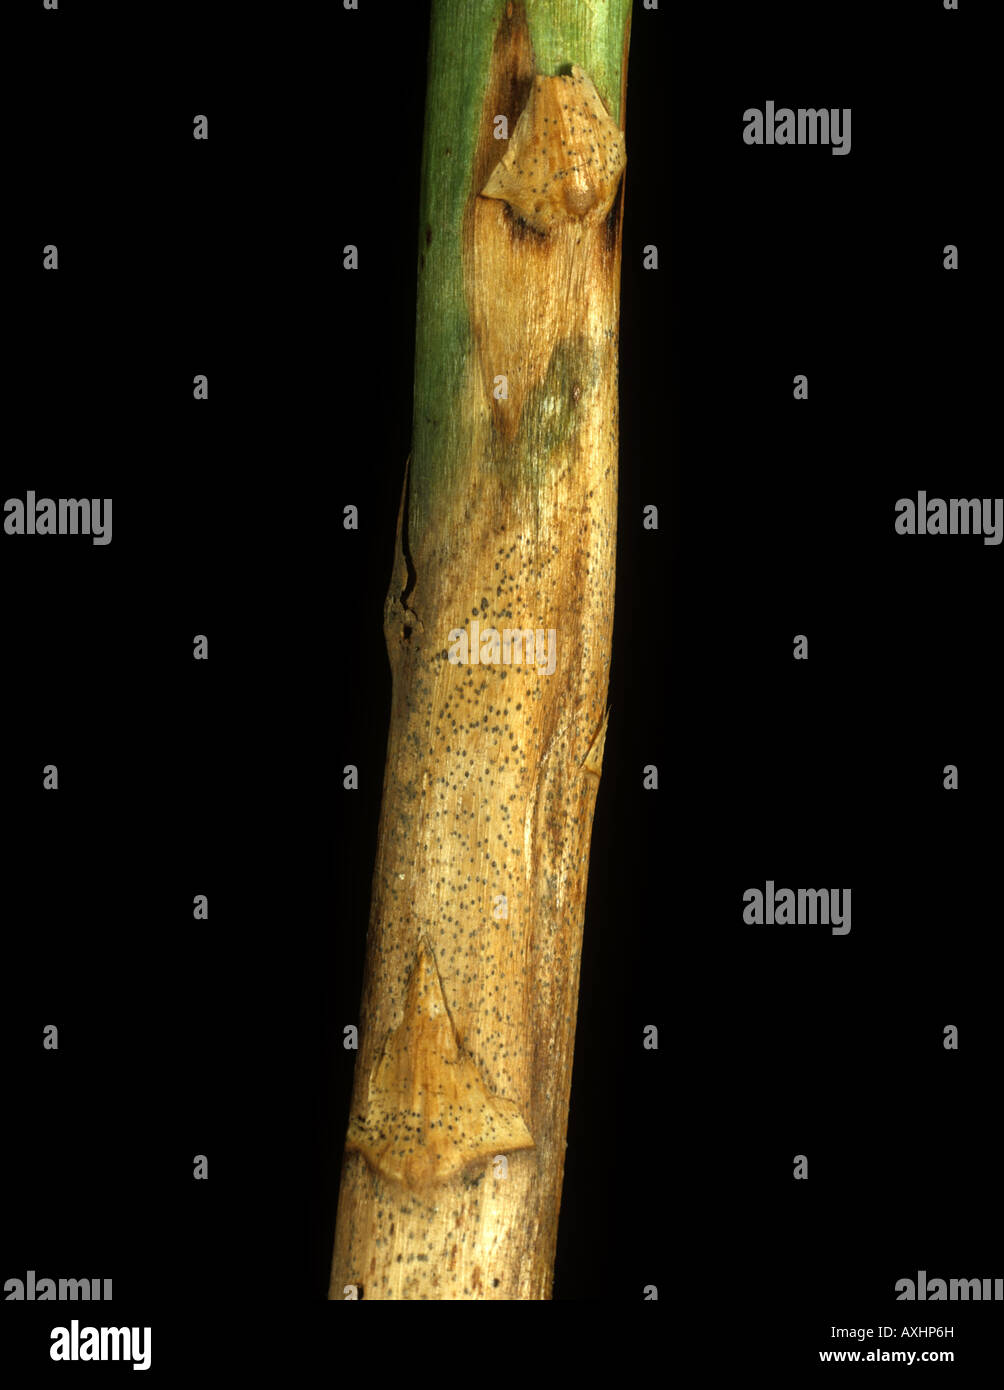 A blight Phomopsis vexans lesion on an aubergine or eggplant stem Stock Photo